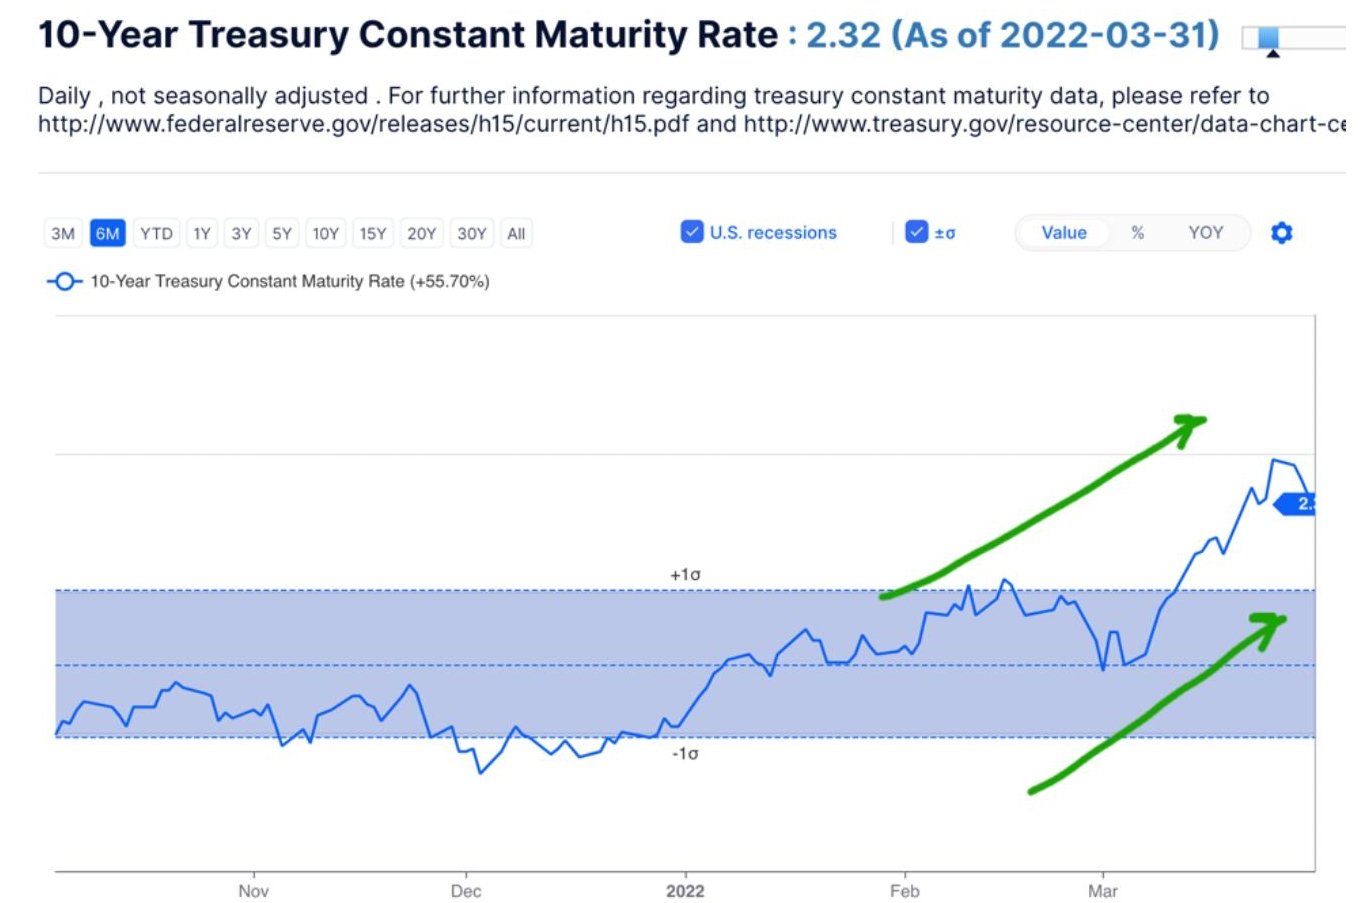 10-year Treasury Constant Maturity Rate